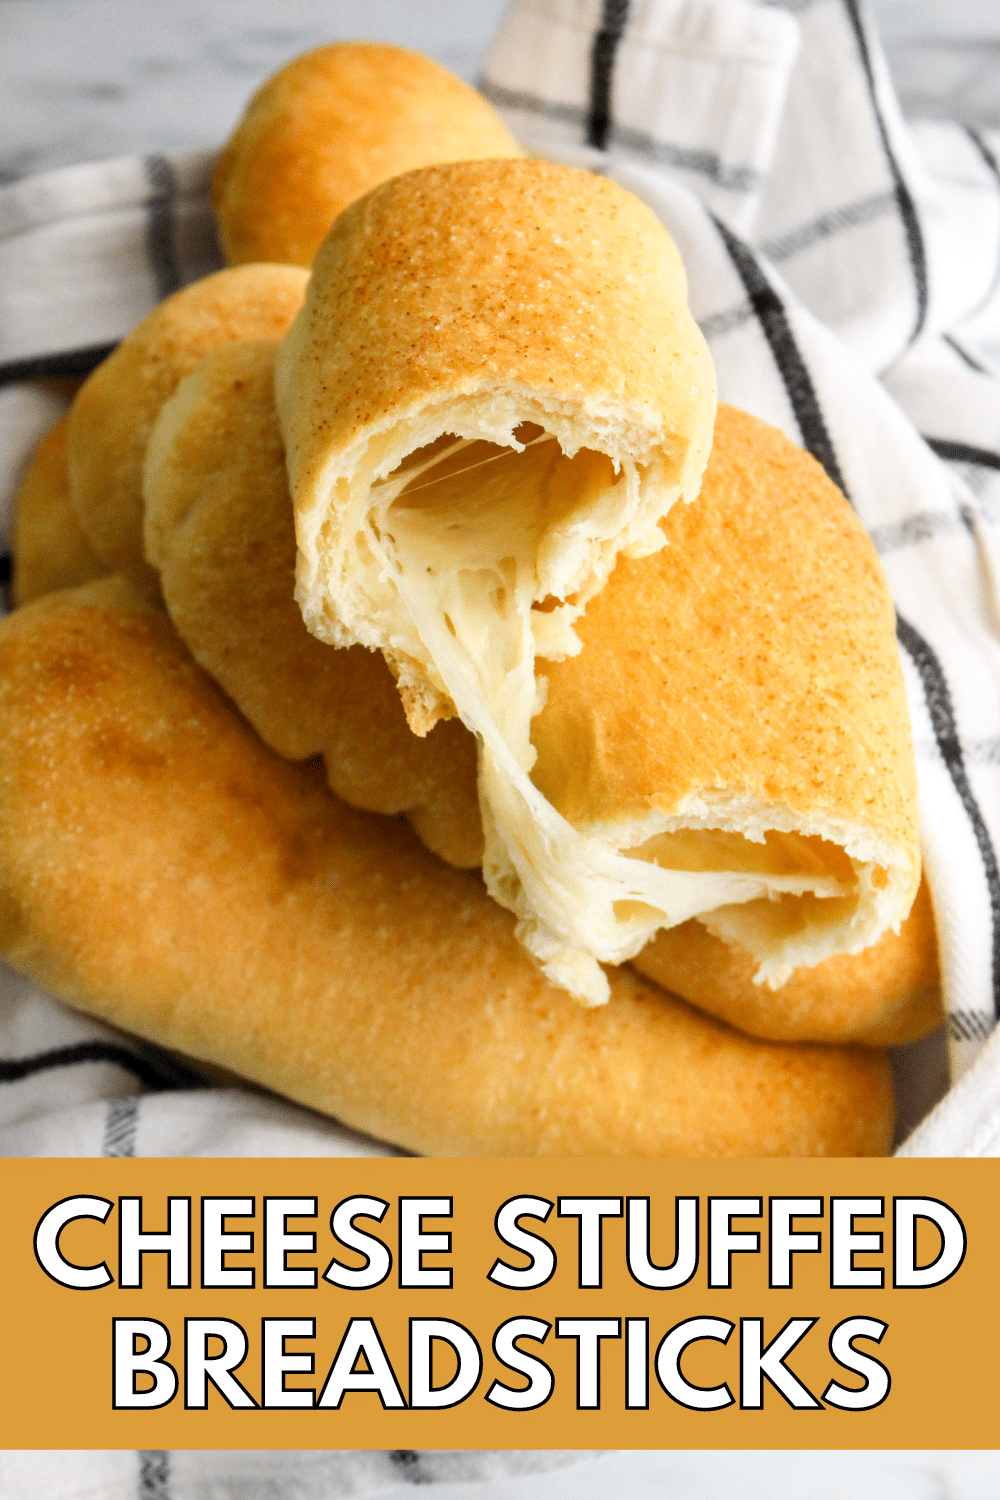 Stuffed breadsticks filled with cheese.